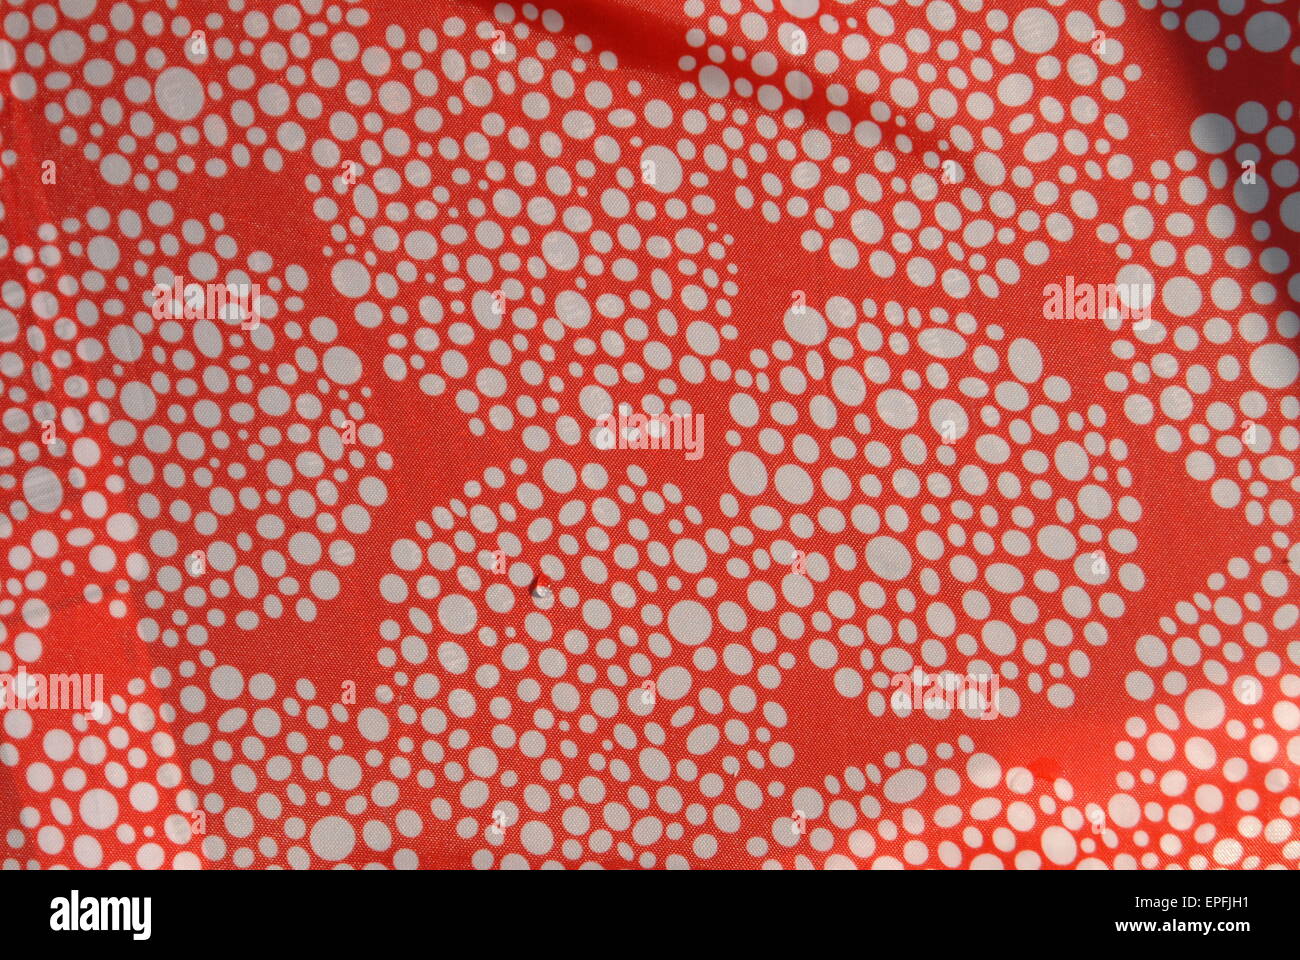 Red and white pattern. Stock Photo